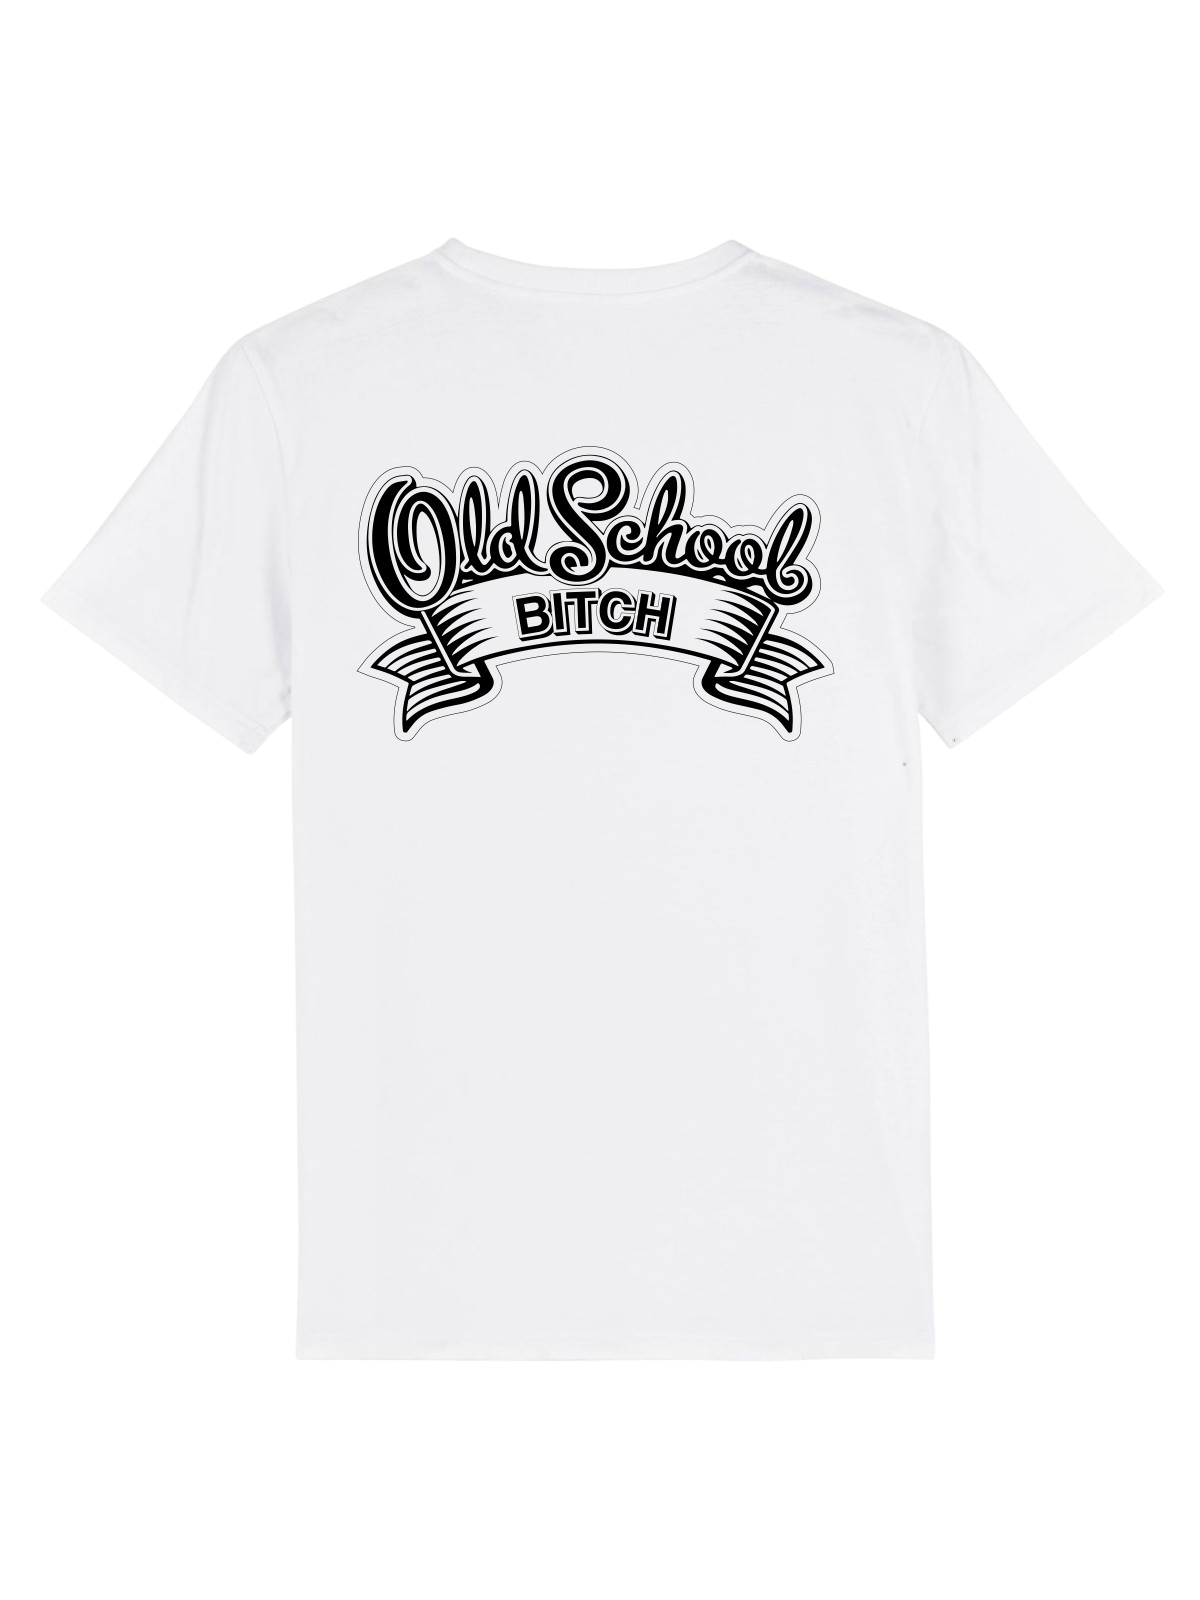 4Brothers T-Shirt old school bitch T-Shirt New White 5XL